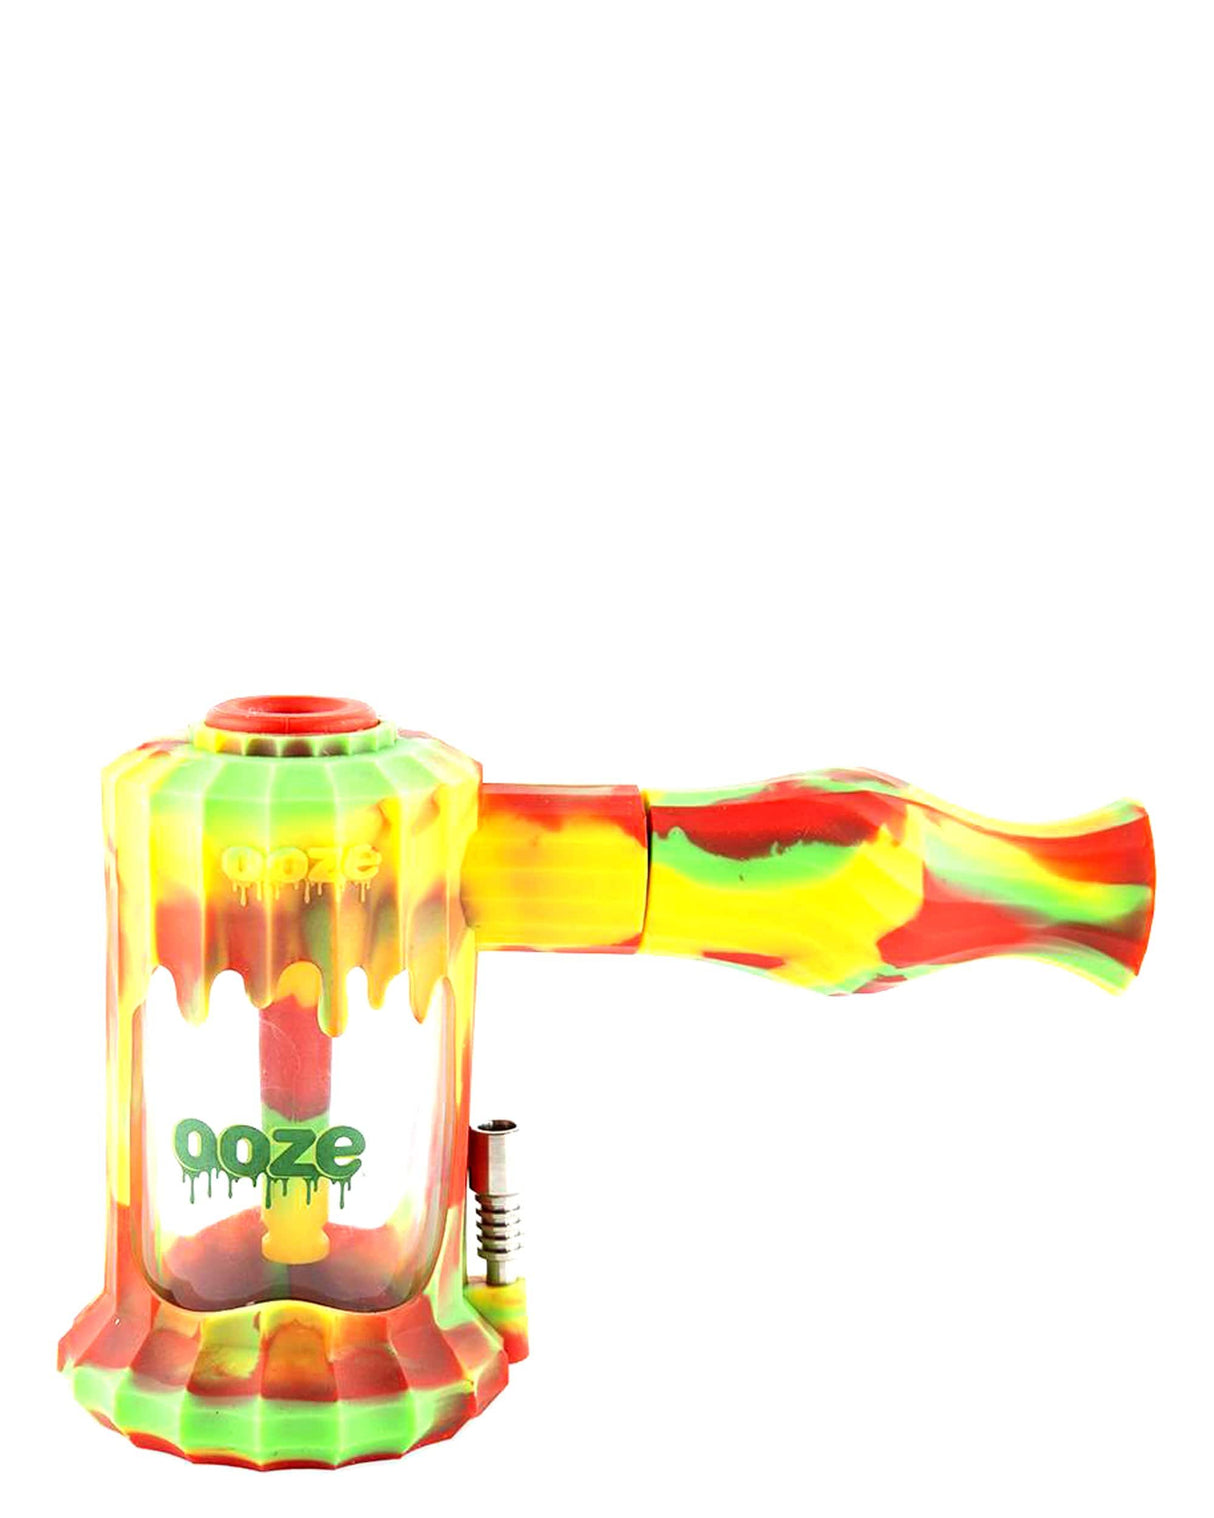 Ooze Clobb Silicone Hammer Pipe in Rasta colors with Glass Bowl - Front View